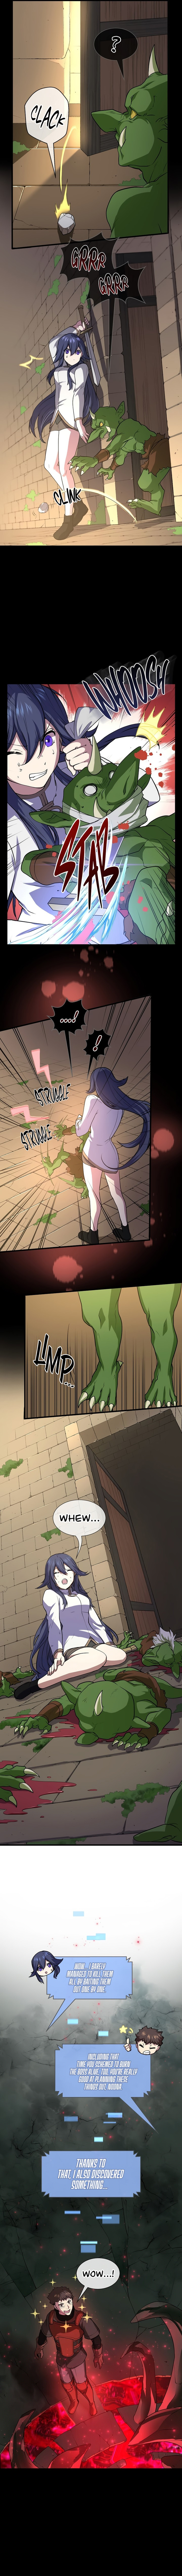 Level Up With Skills Chapter 28 Page 3